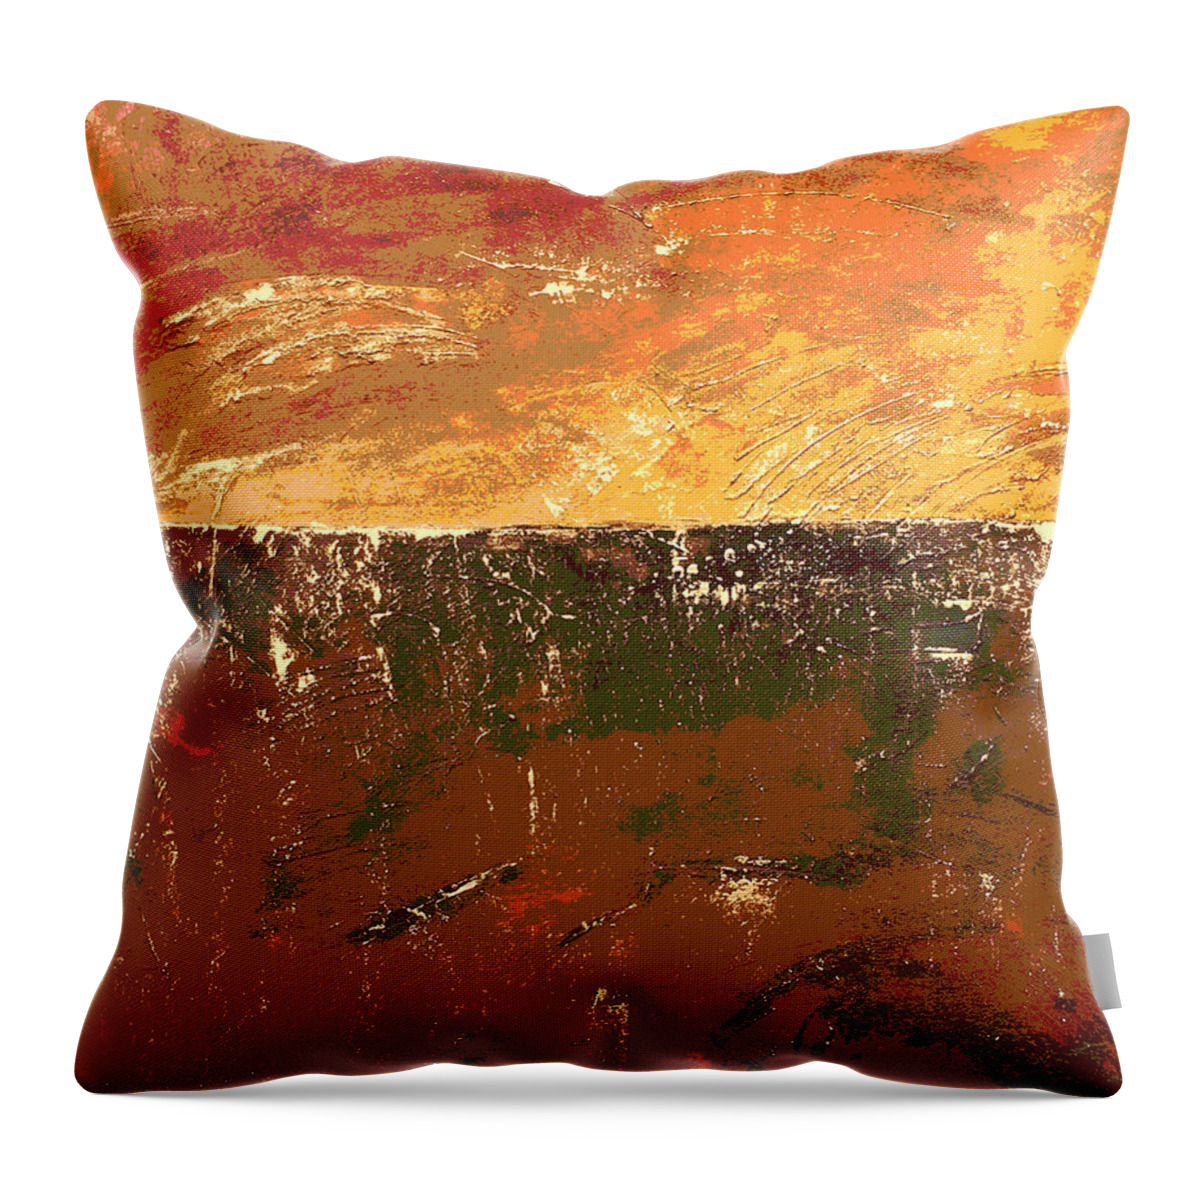 Gold Throw Pillow featuring the painting Gold Dust by Linda Bailey